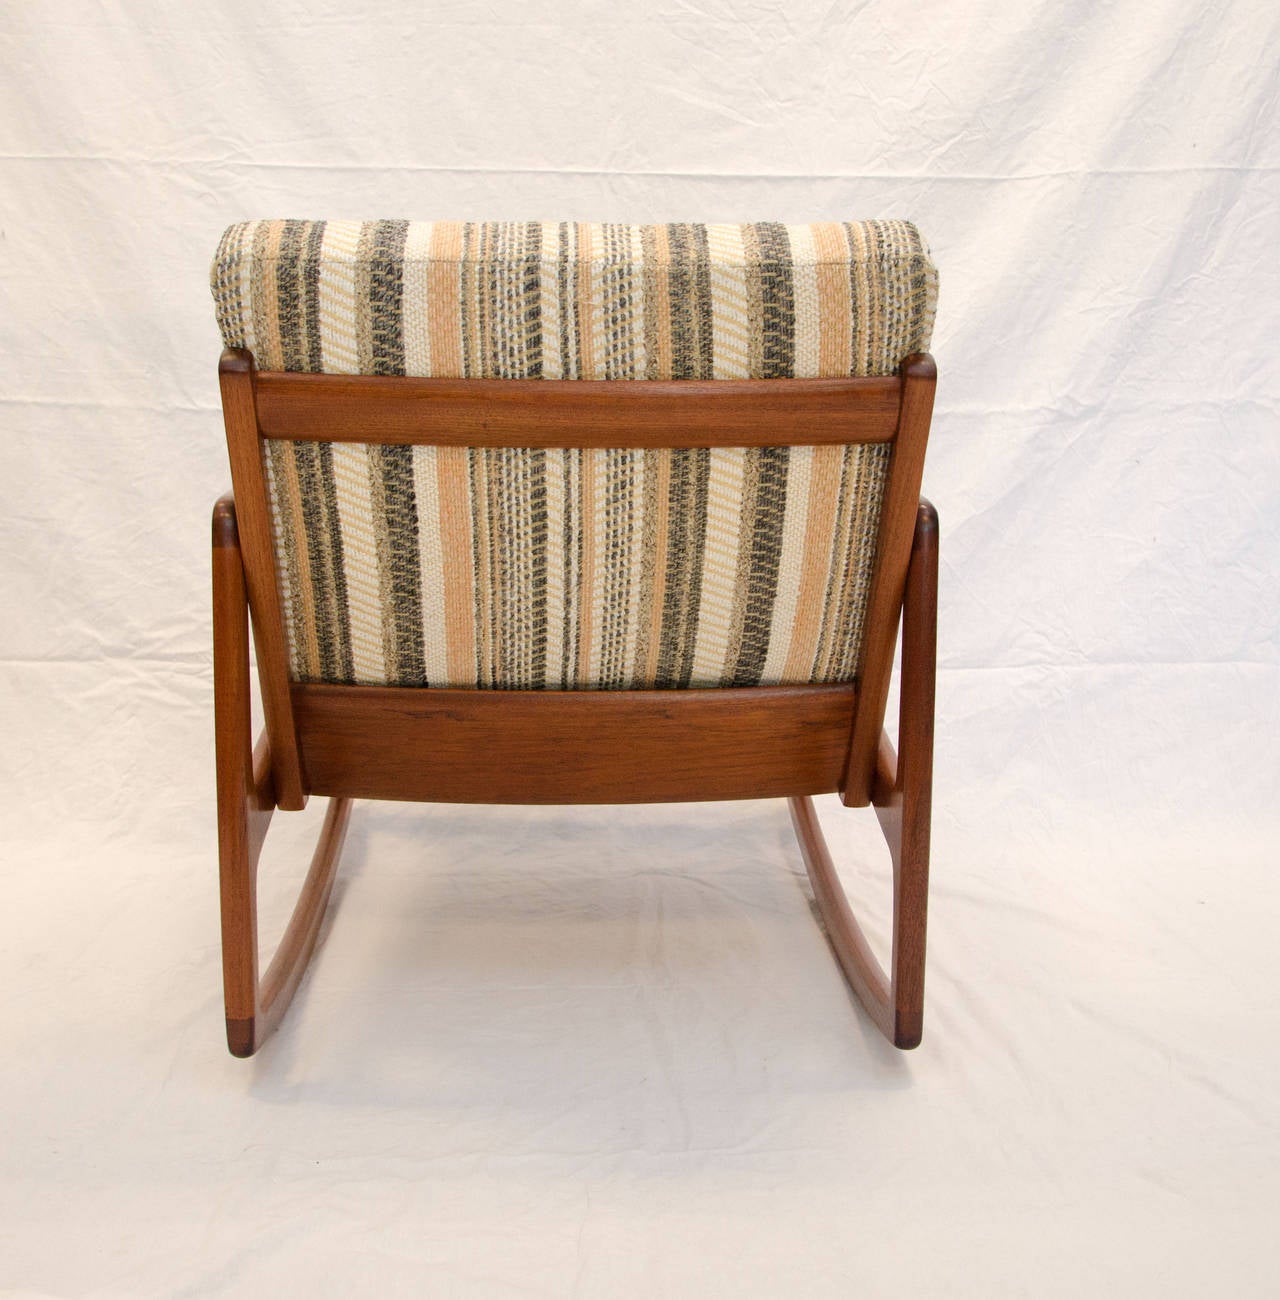 20th Century Danish Teak Rocking Chair by Ole Wanscher for France & Sons